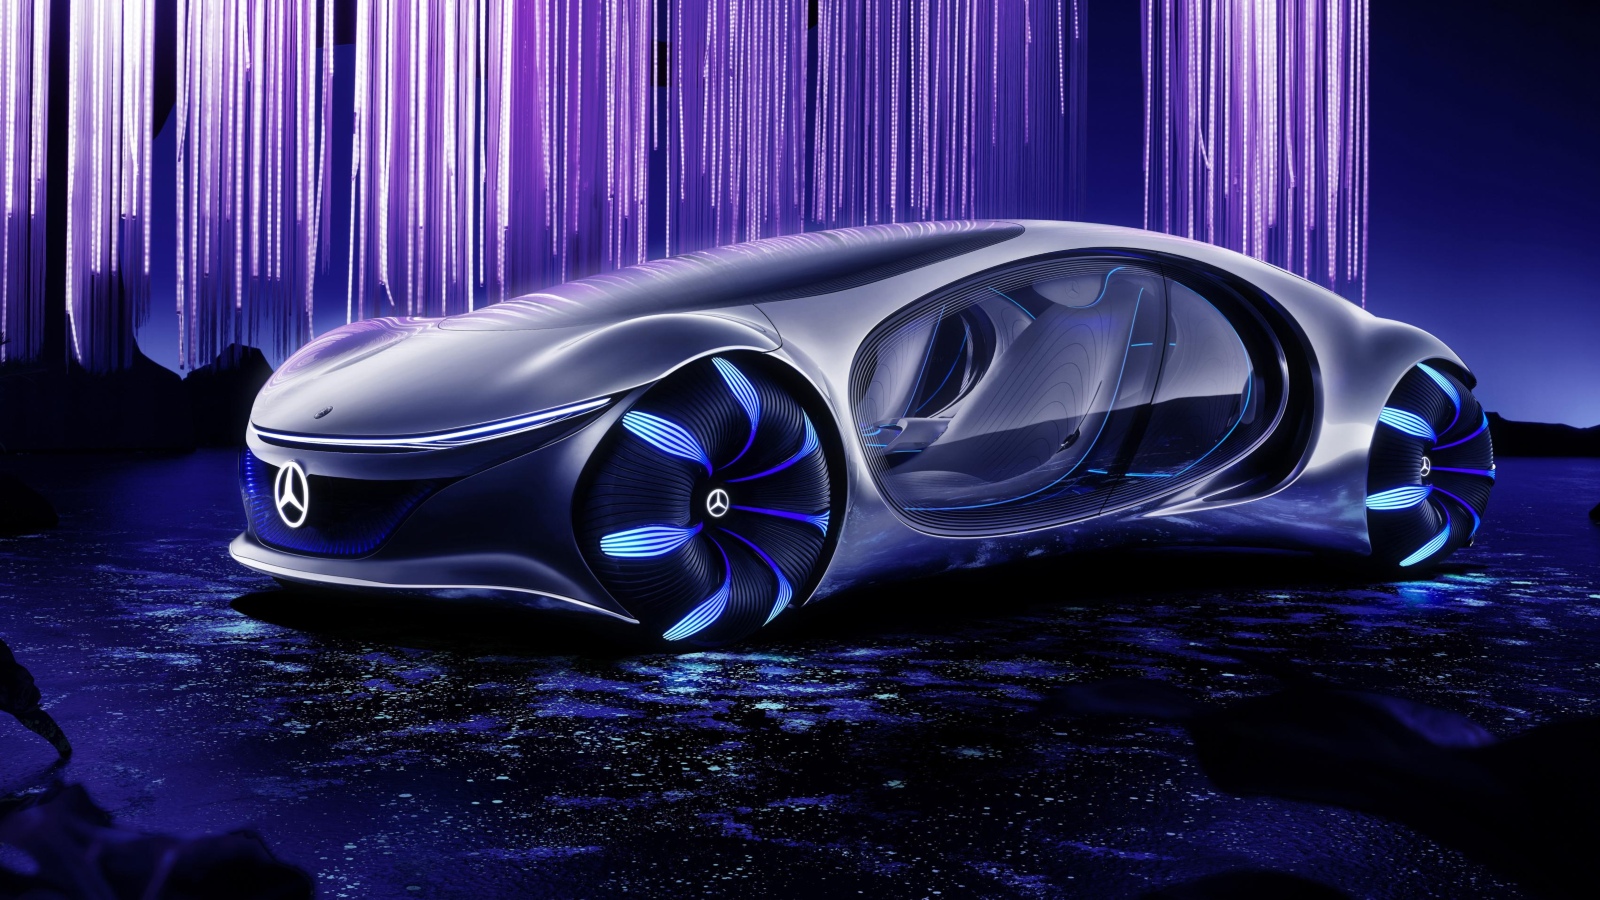 Here Are The 9 Most Fascinating (And Otherworldly) Cars Seen At CES ...